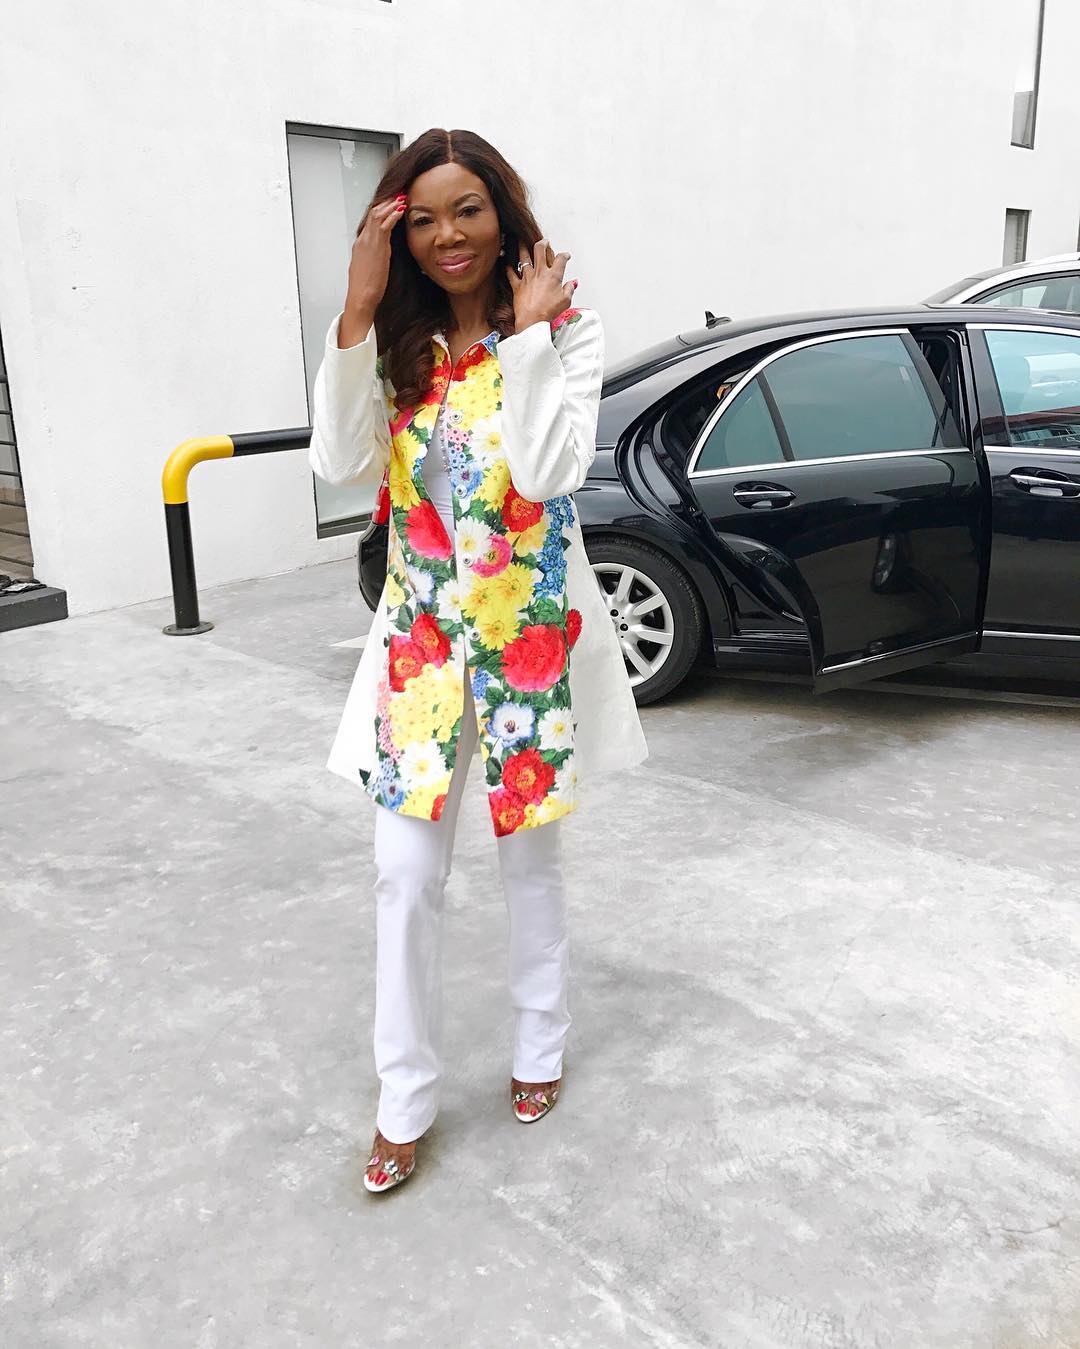 BellaNaija - "We must learn to give thanks" - Betty Irabor speaks against the spirit of Ingratitude